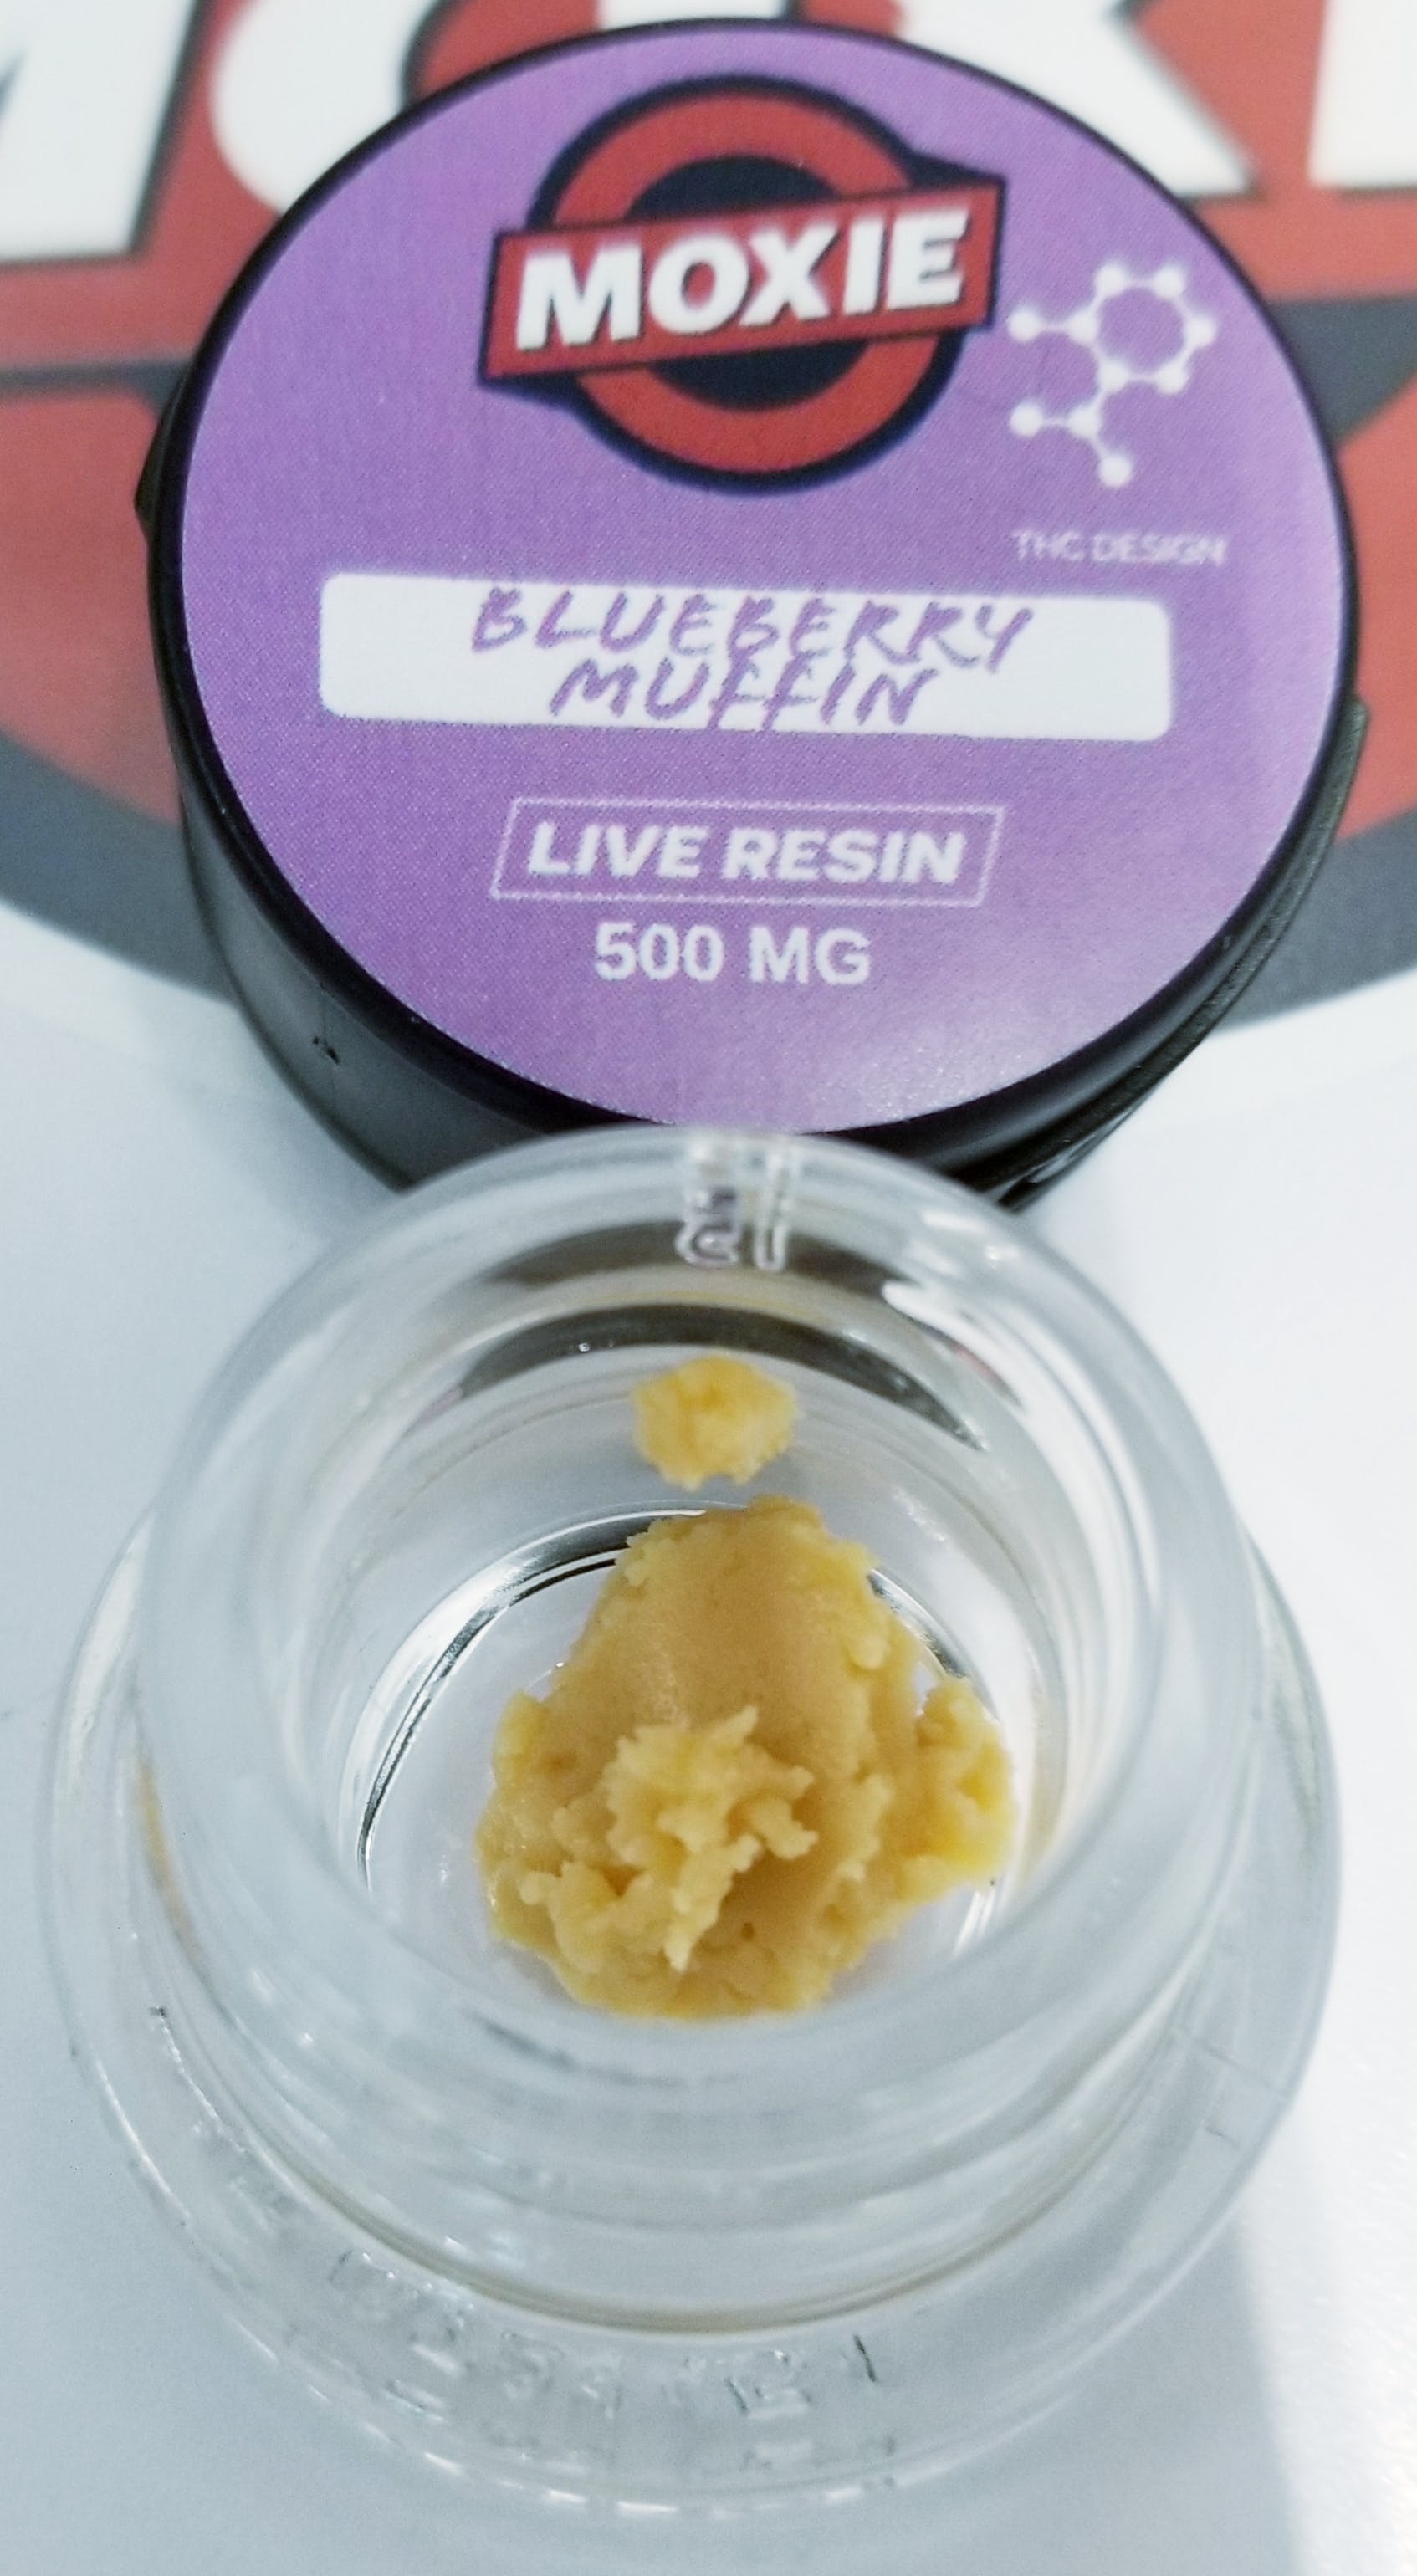 marijuana-dispensaries-the-kind-center-2c-inc-in-hollywood-blueberry-muffin-live-resin-badder